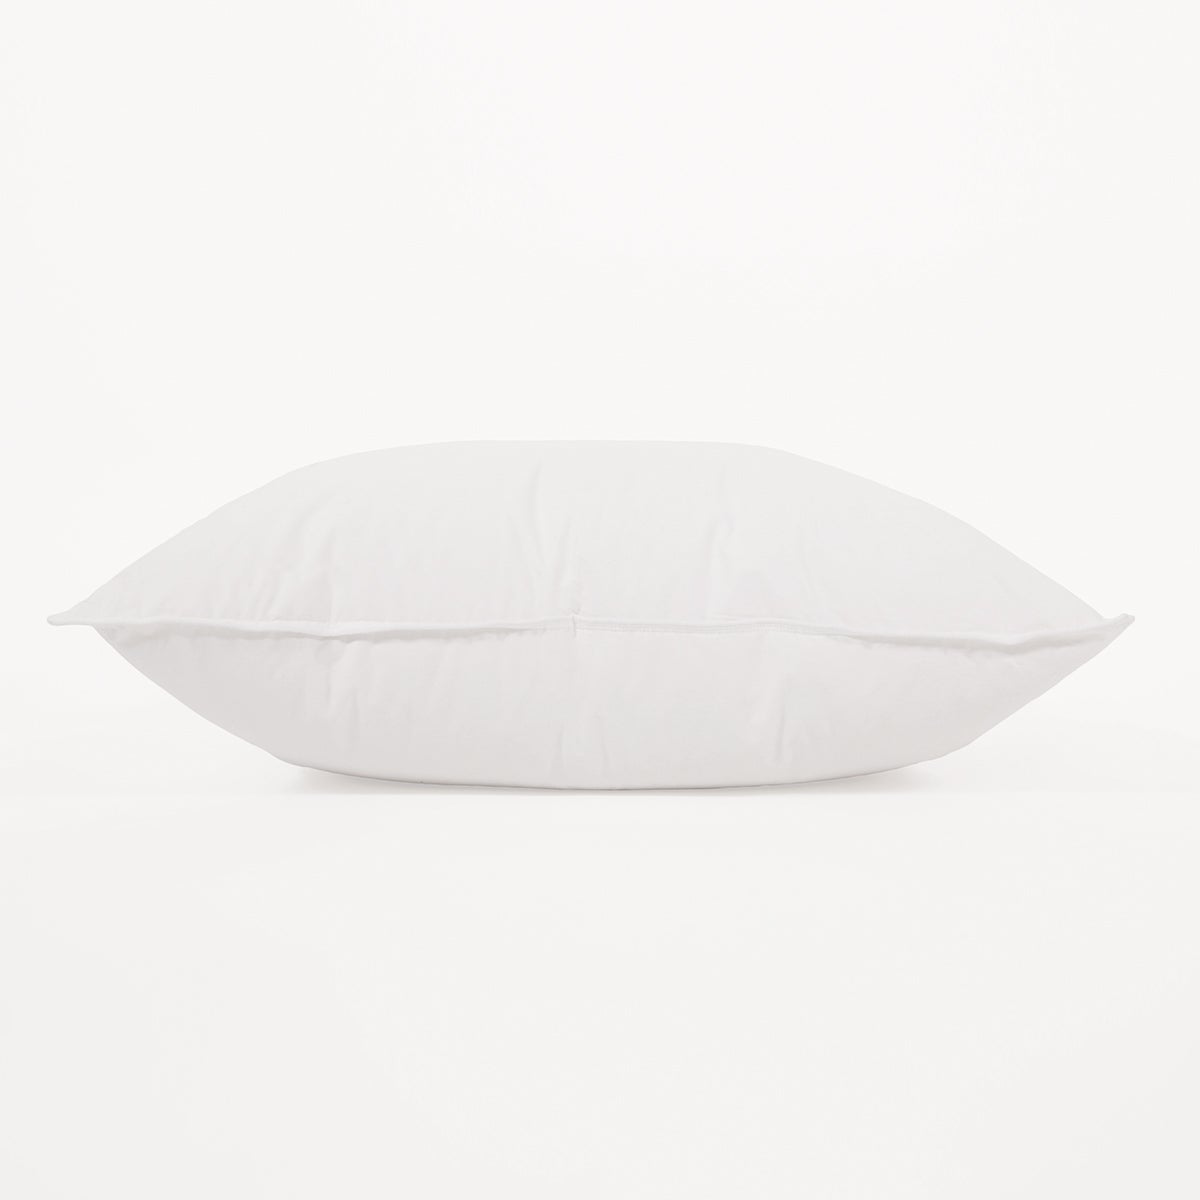 DOWN SLEEPING PILLOW INSERTS - Pom pom at Home